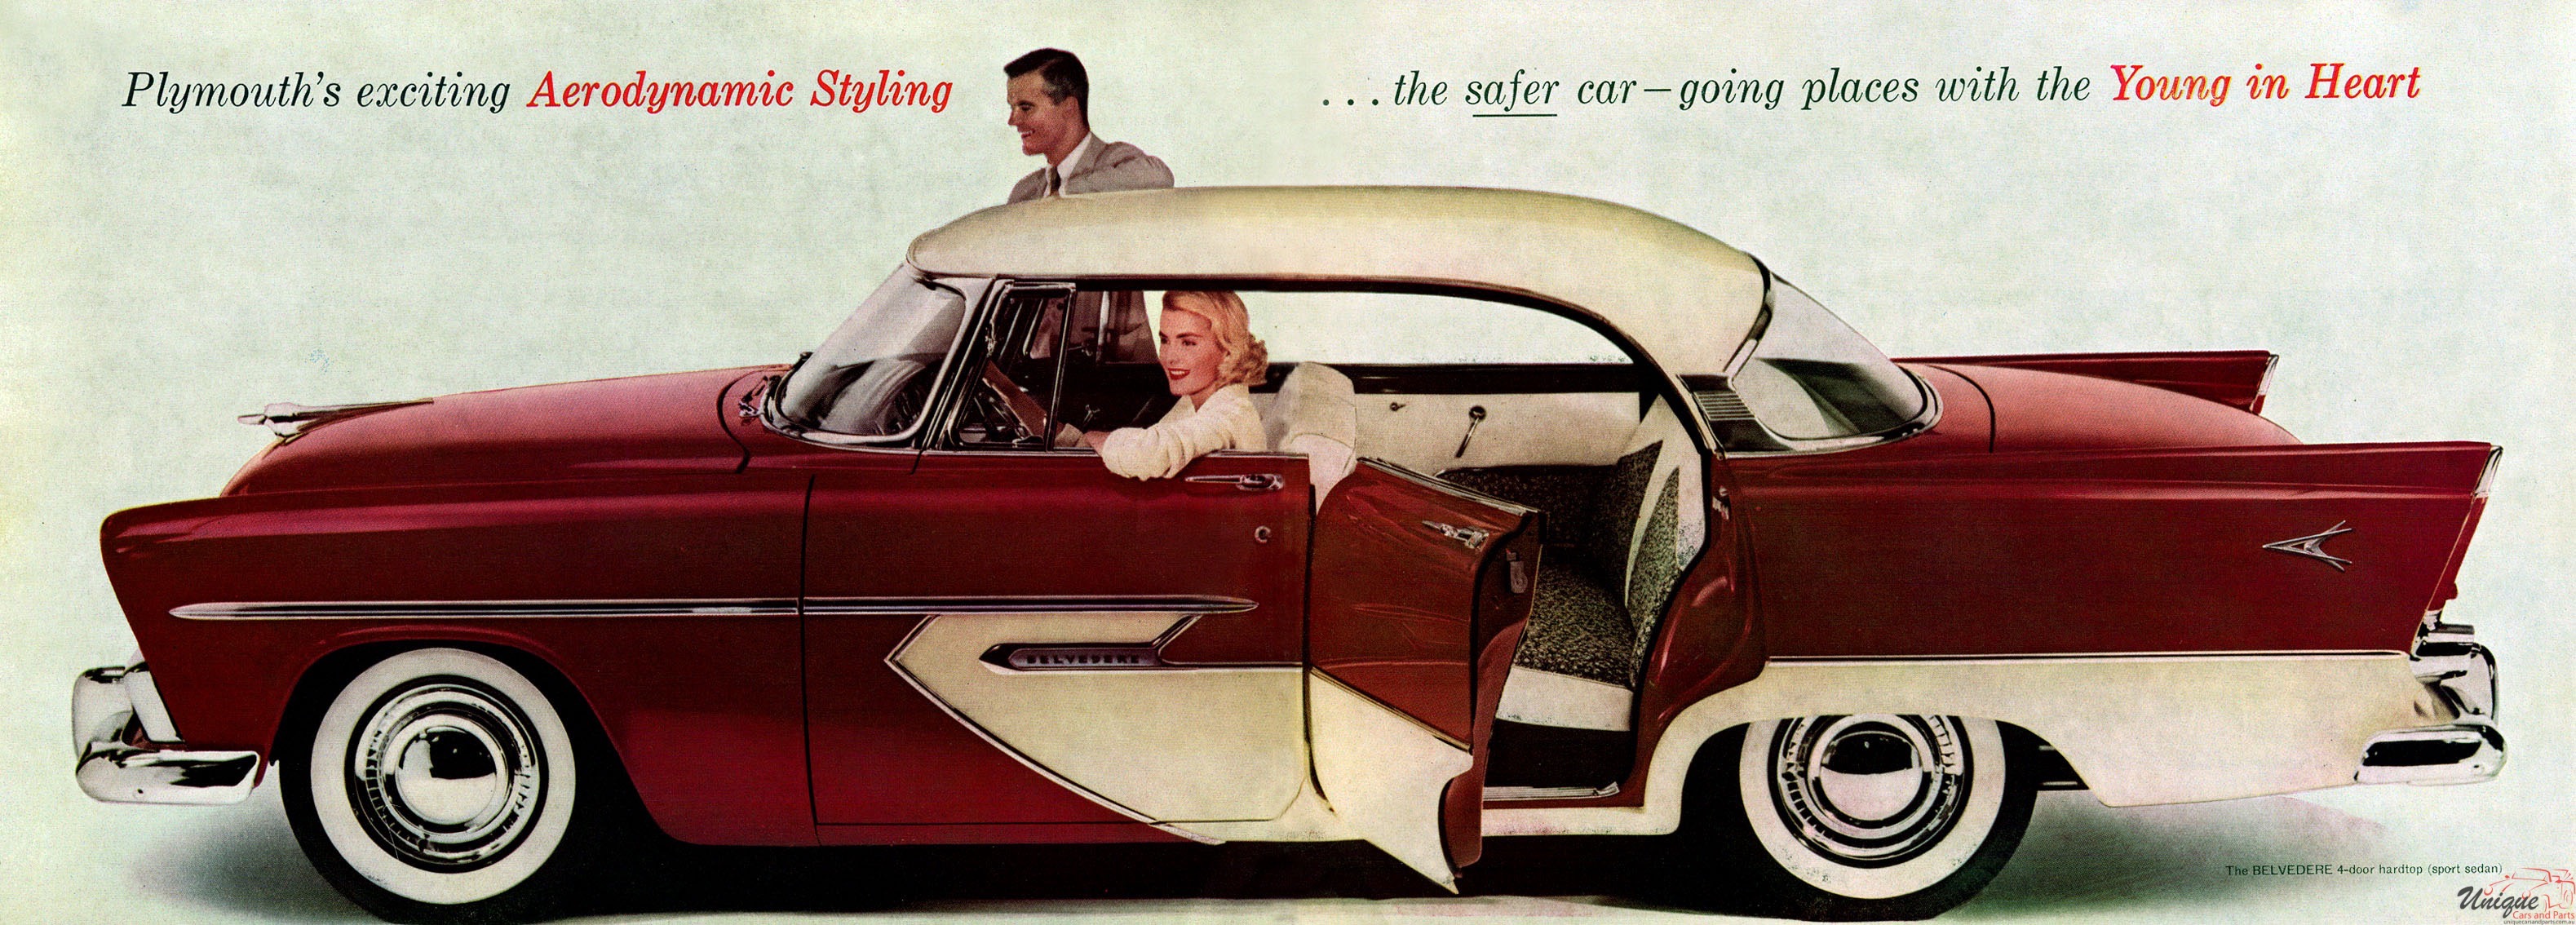 1956 Plymouth Brochure Page 1